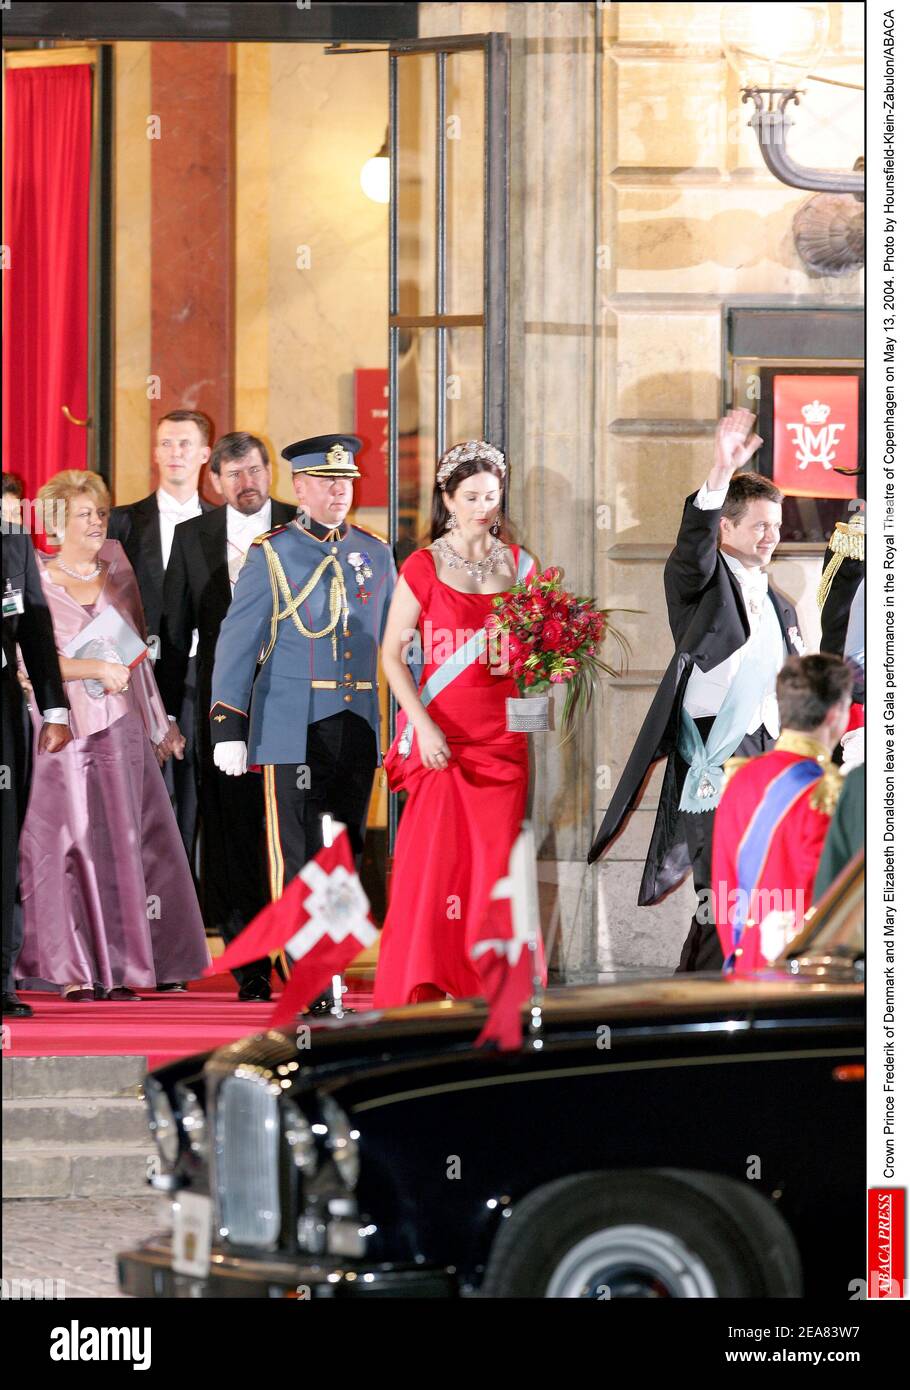 Crown Prince Frederik of Denmark and Mary Elizabeth Donaldson leave at Gala performance in the Royal Theatre of Copenhagen on May 13, 2004. Photo by Hounsfield-Klein-Zabulon/ABACA Stock Photo